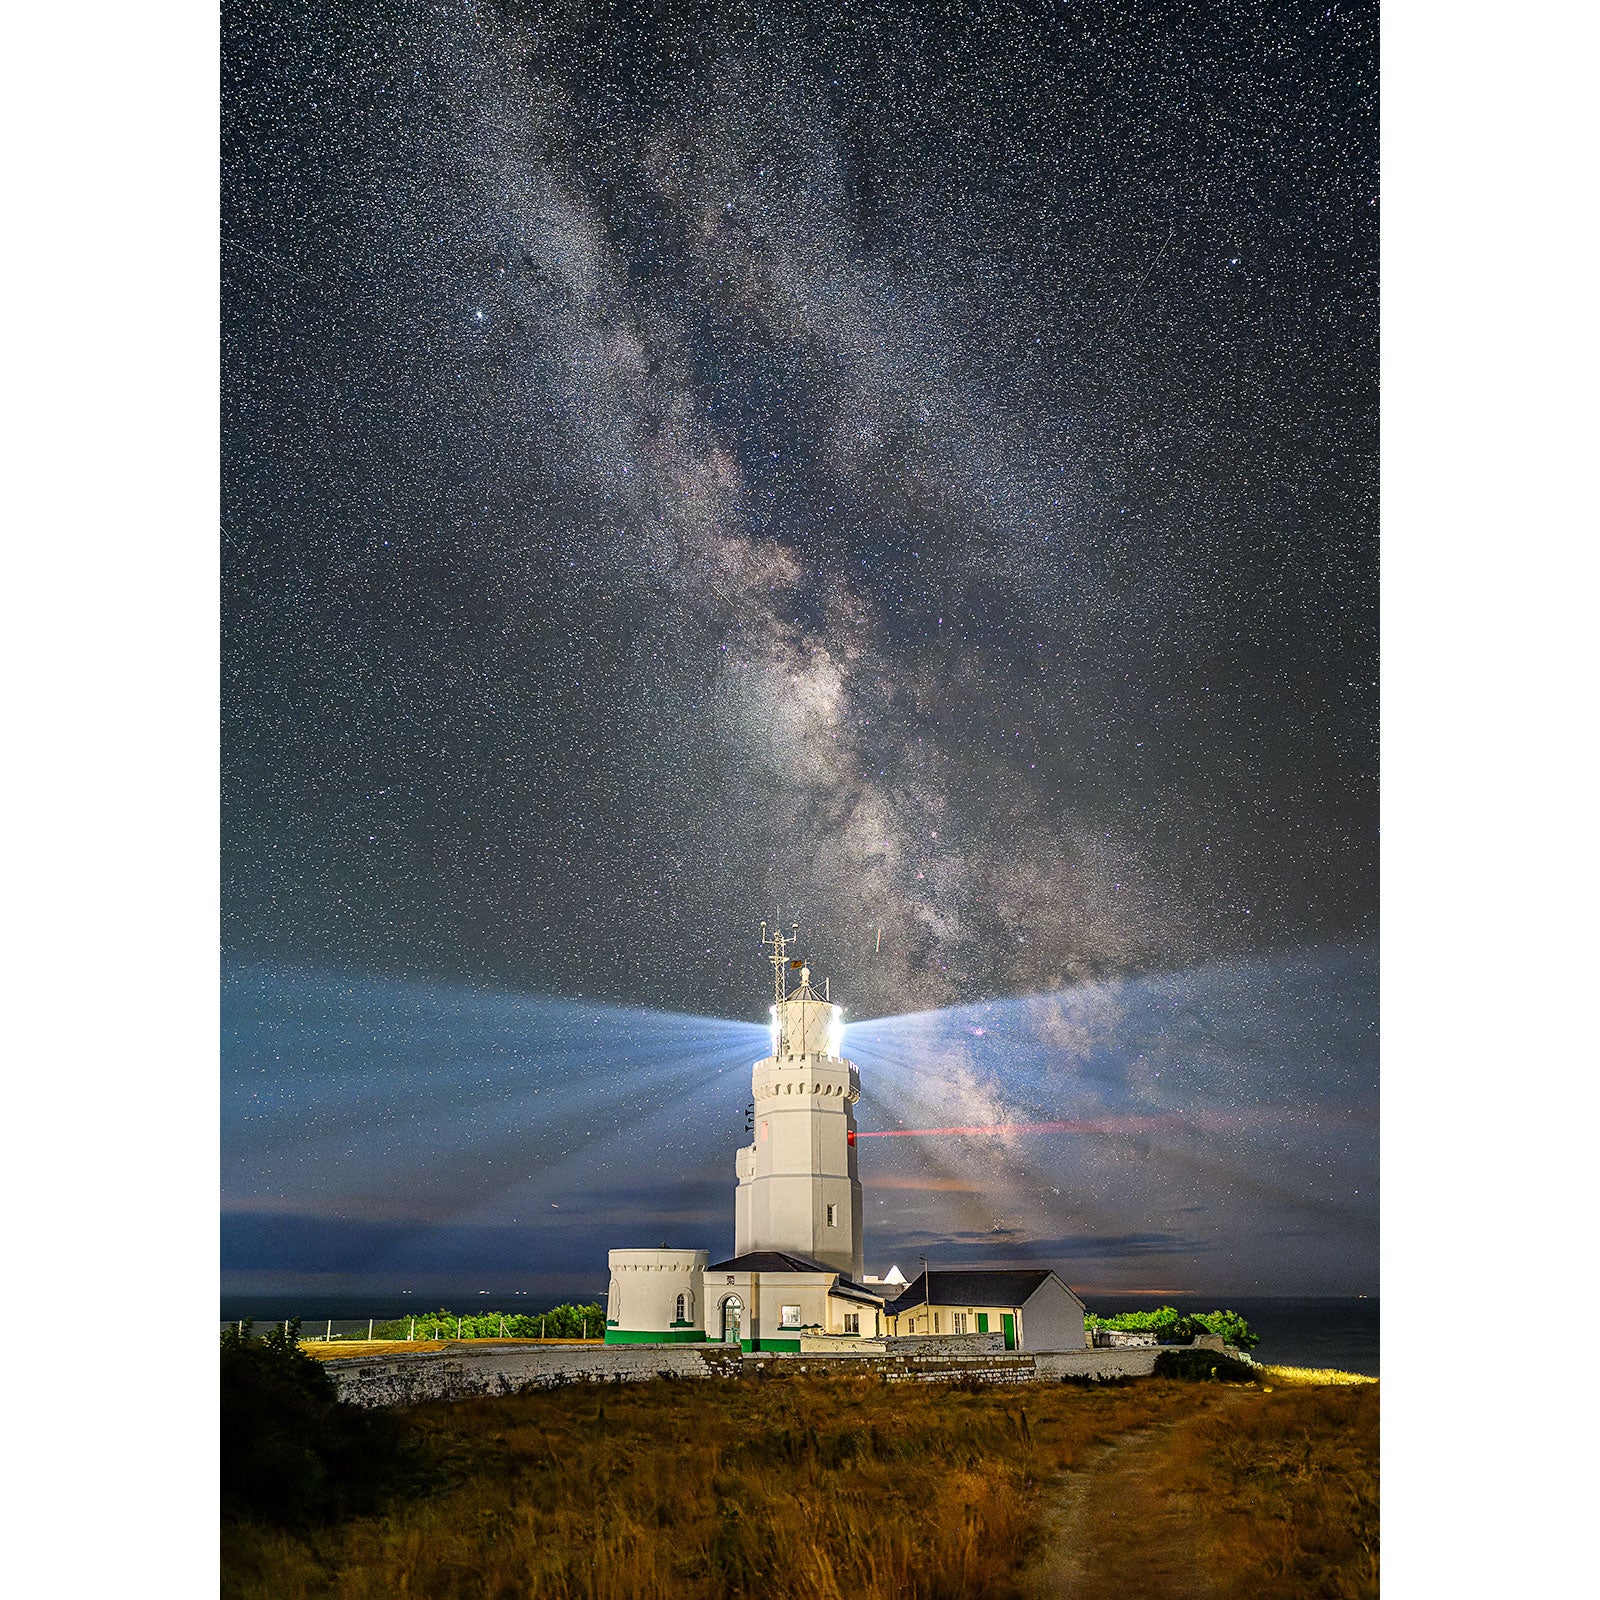 Lighthouse under a starry night sky with the Milky Way galaxy visible on the Isle of Gascoigne captured by Available Light Photography featuring St. Catherine's Lighthouse.